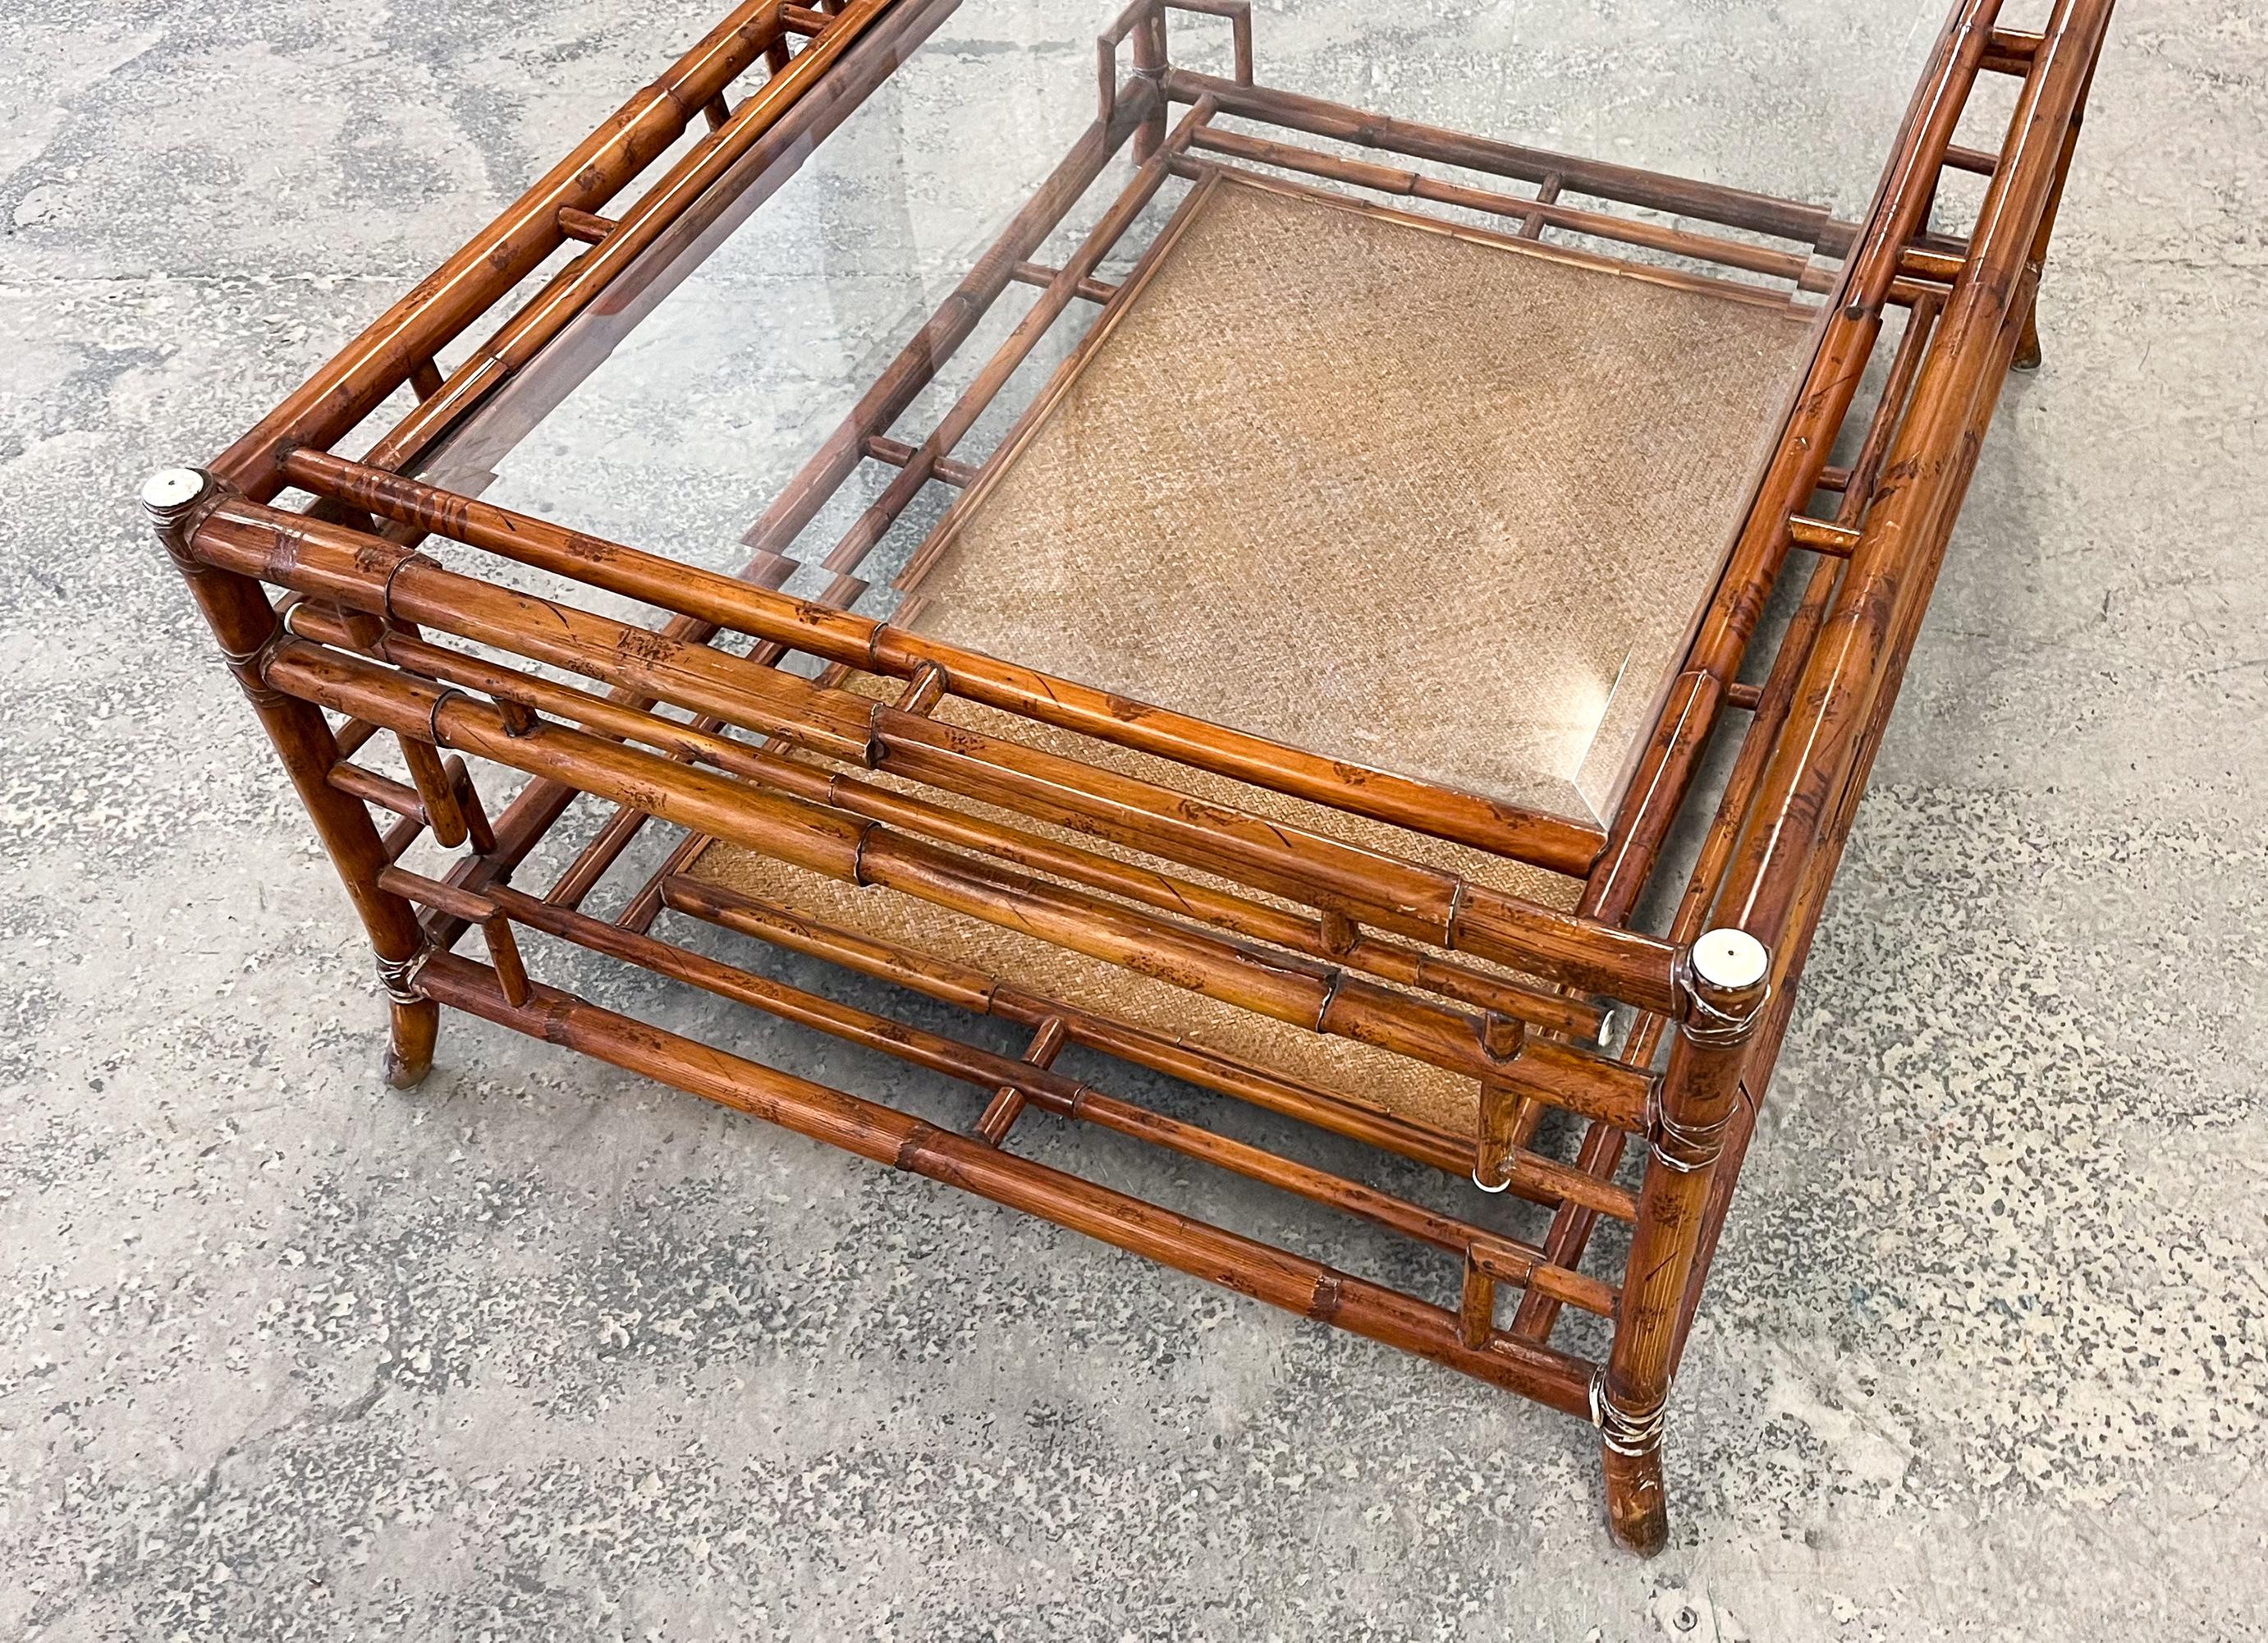 Chinese Export Antique 19th Century Anglo Chinese Bamboo Low Table Coffee Table C.1815